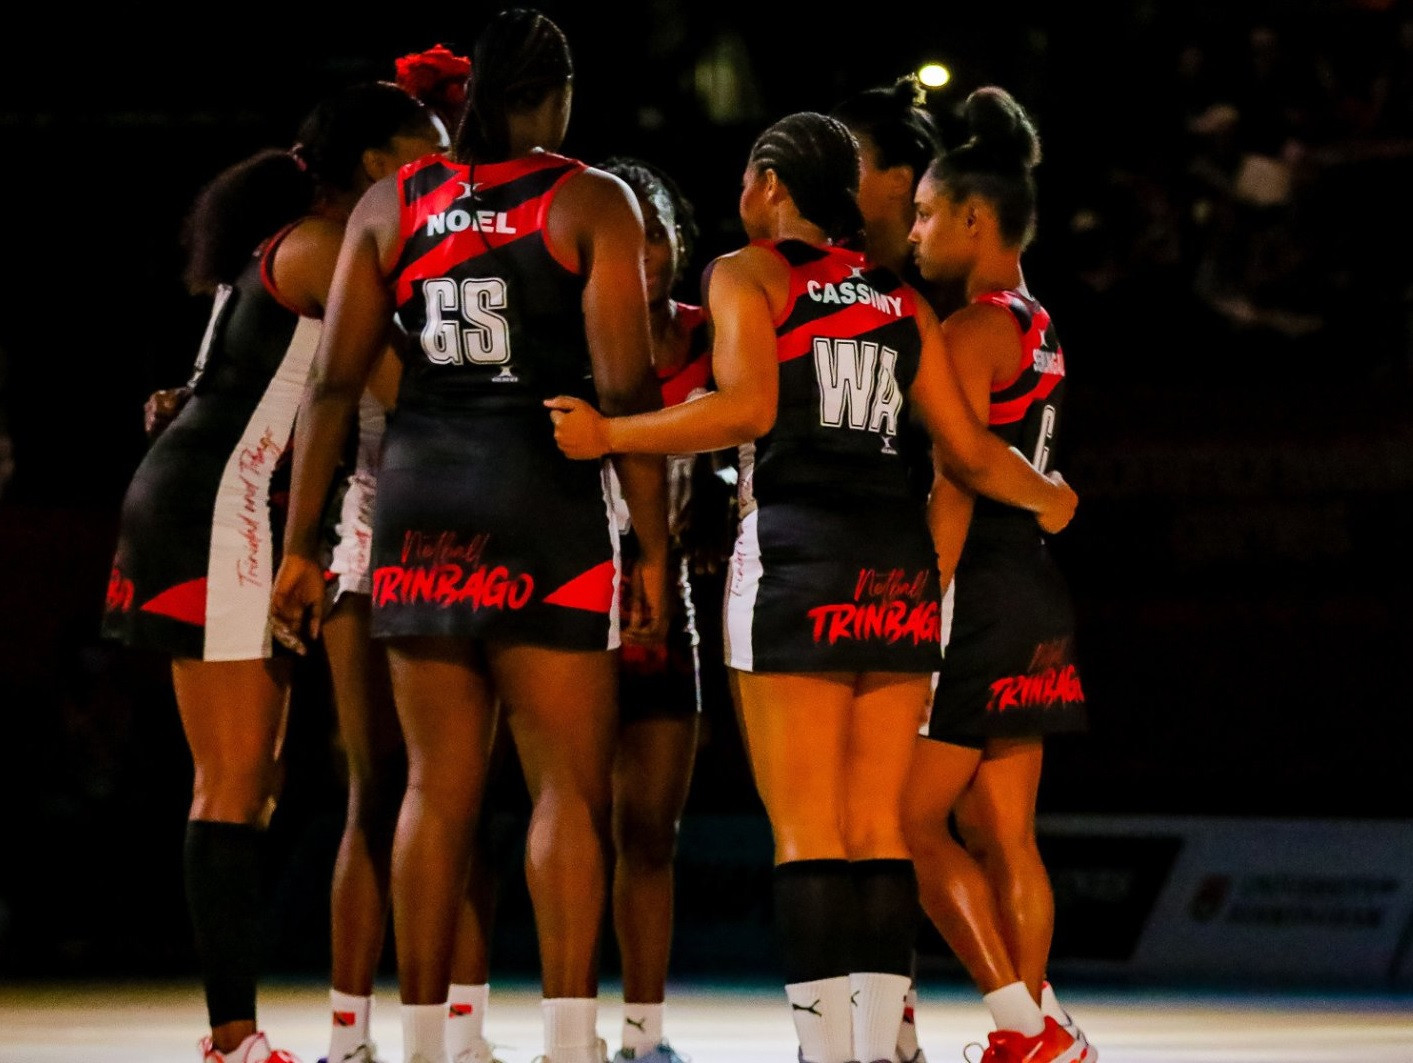 Hosts Trinidad and Tobago are among the nations that are set to compete in the Fast5 netball as the sport prepares to make its Commonwealth Youth Games debut ©World Netball